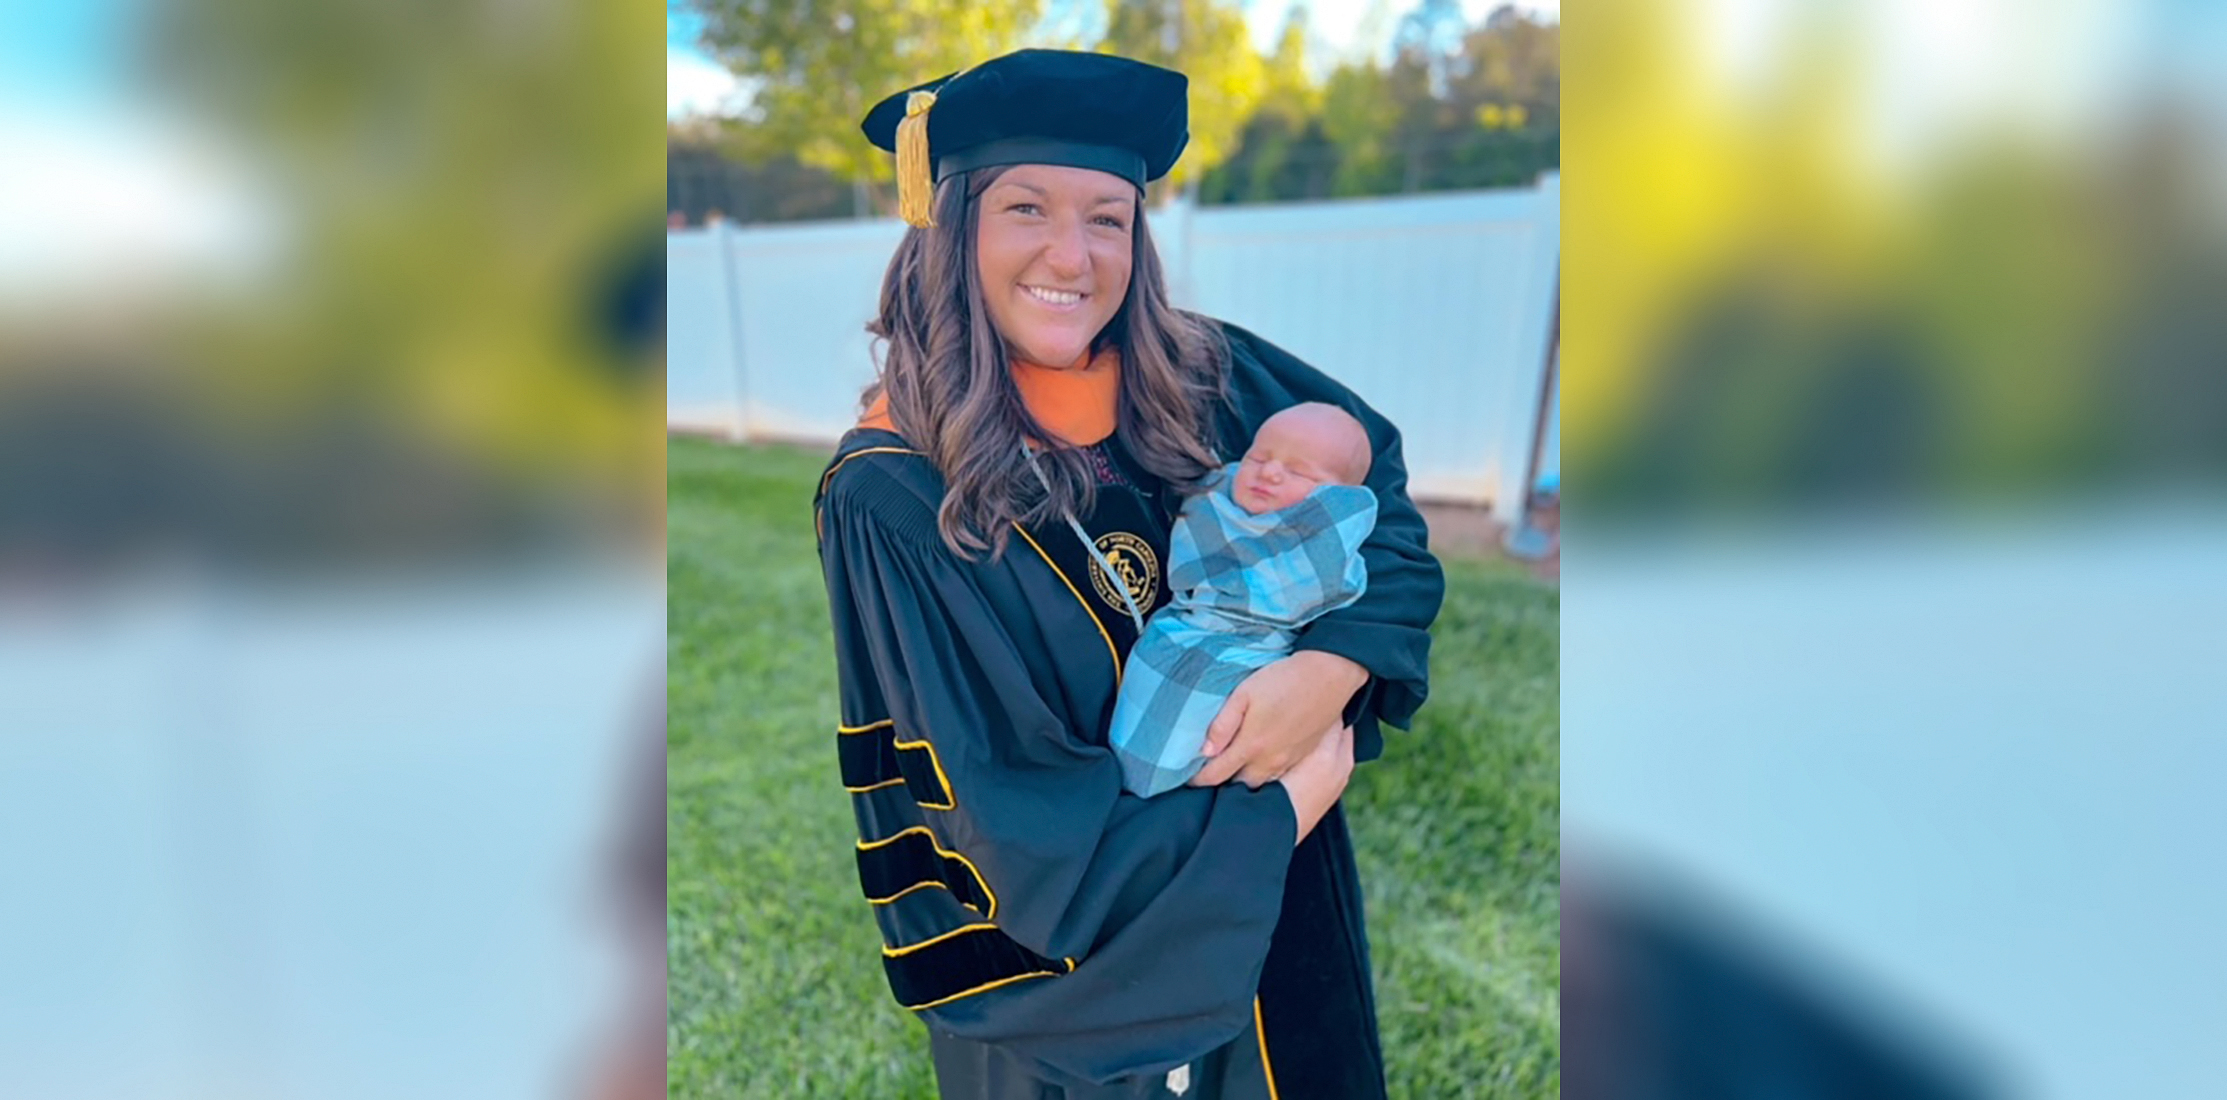 PHOTO: Abby Bailiff, of North Carolina, gave birth and graduated with a doctorate in nursing all within the span of 24 hours.